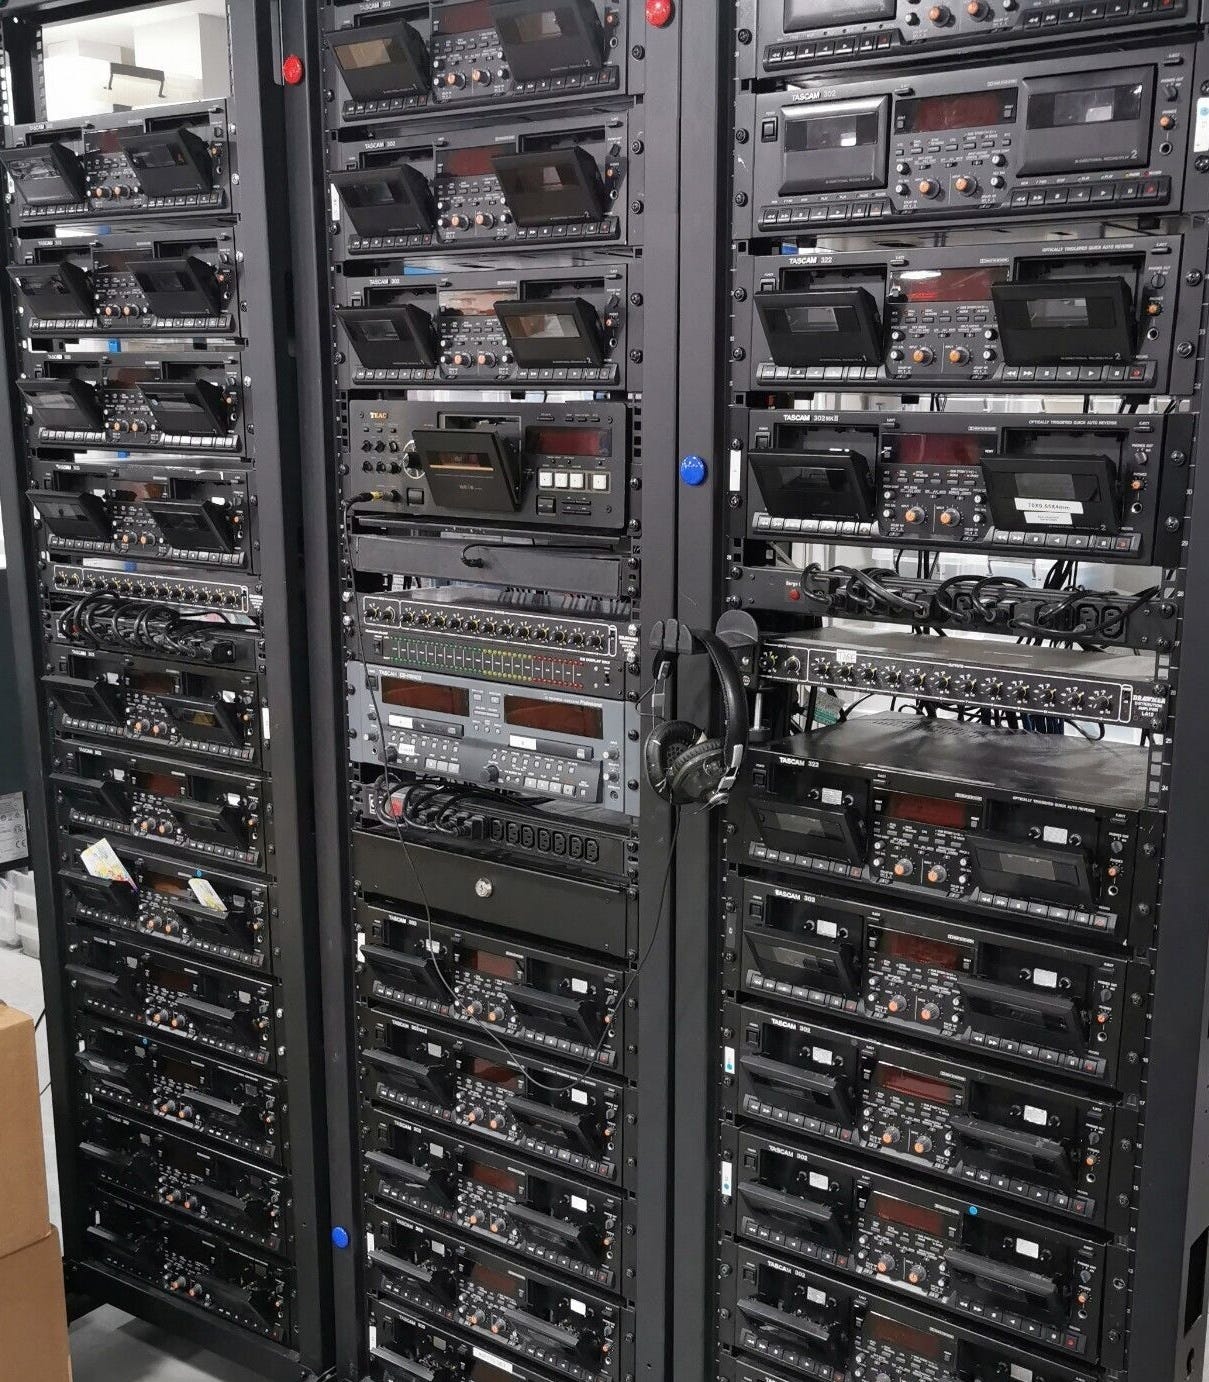 Example of a Compact Cassette bult duplication set-up.